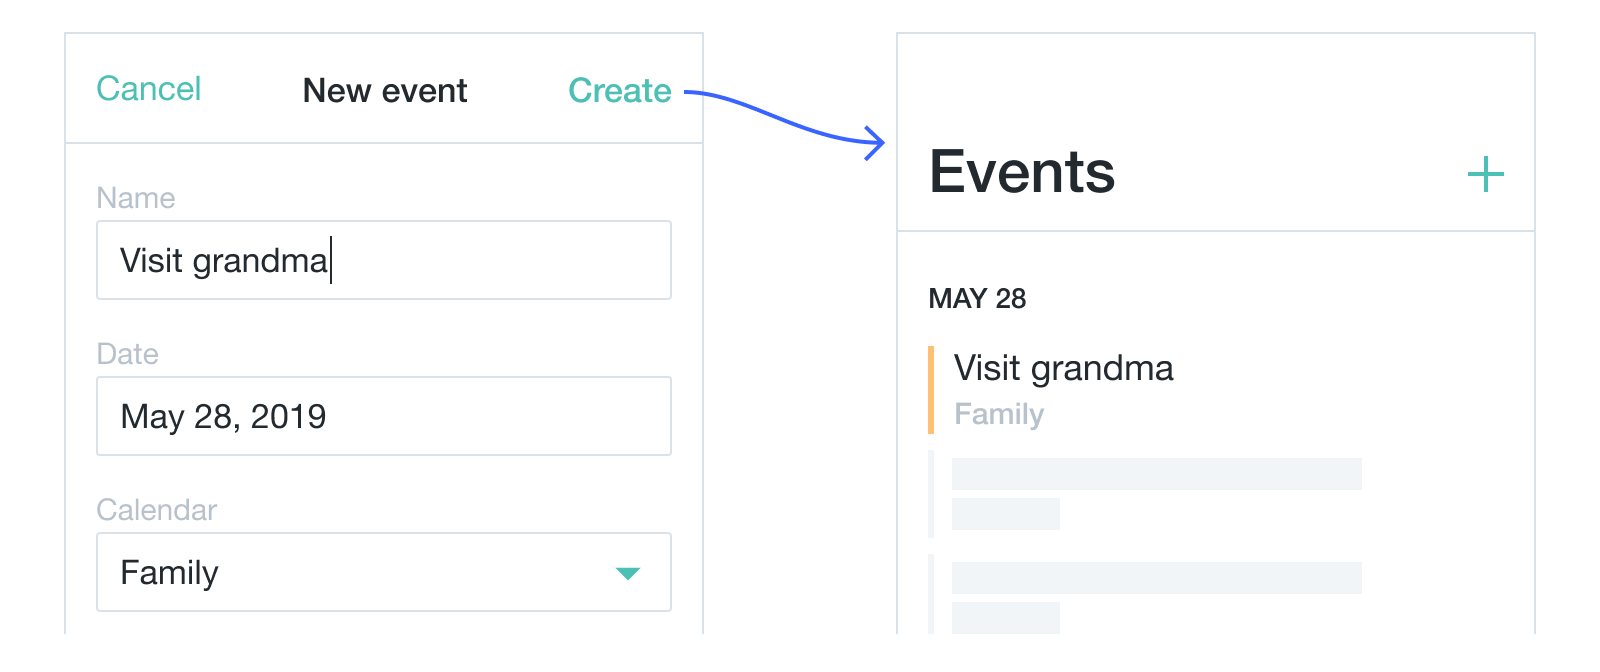 wireframes of event creation view and events list populated with created event